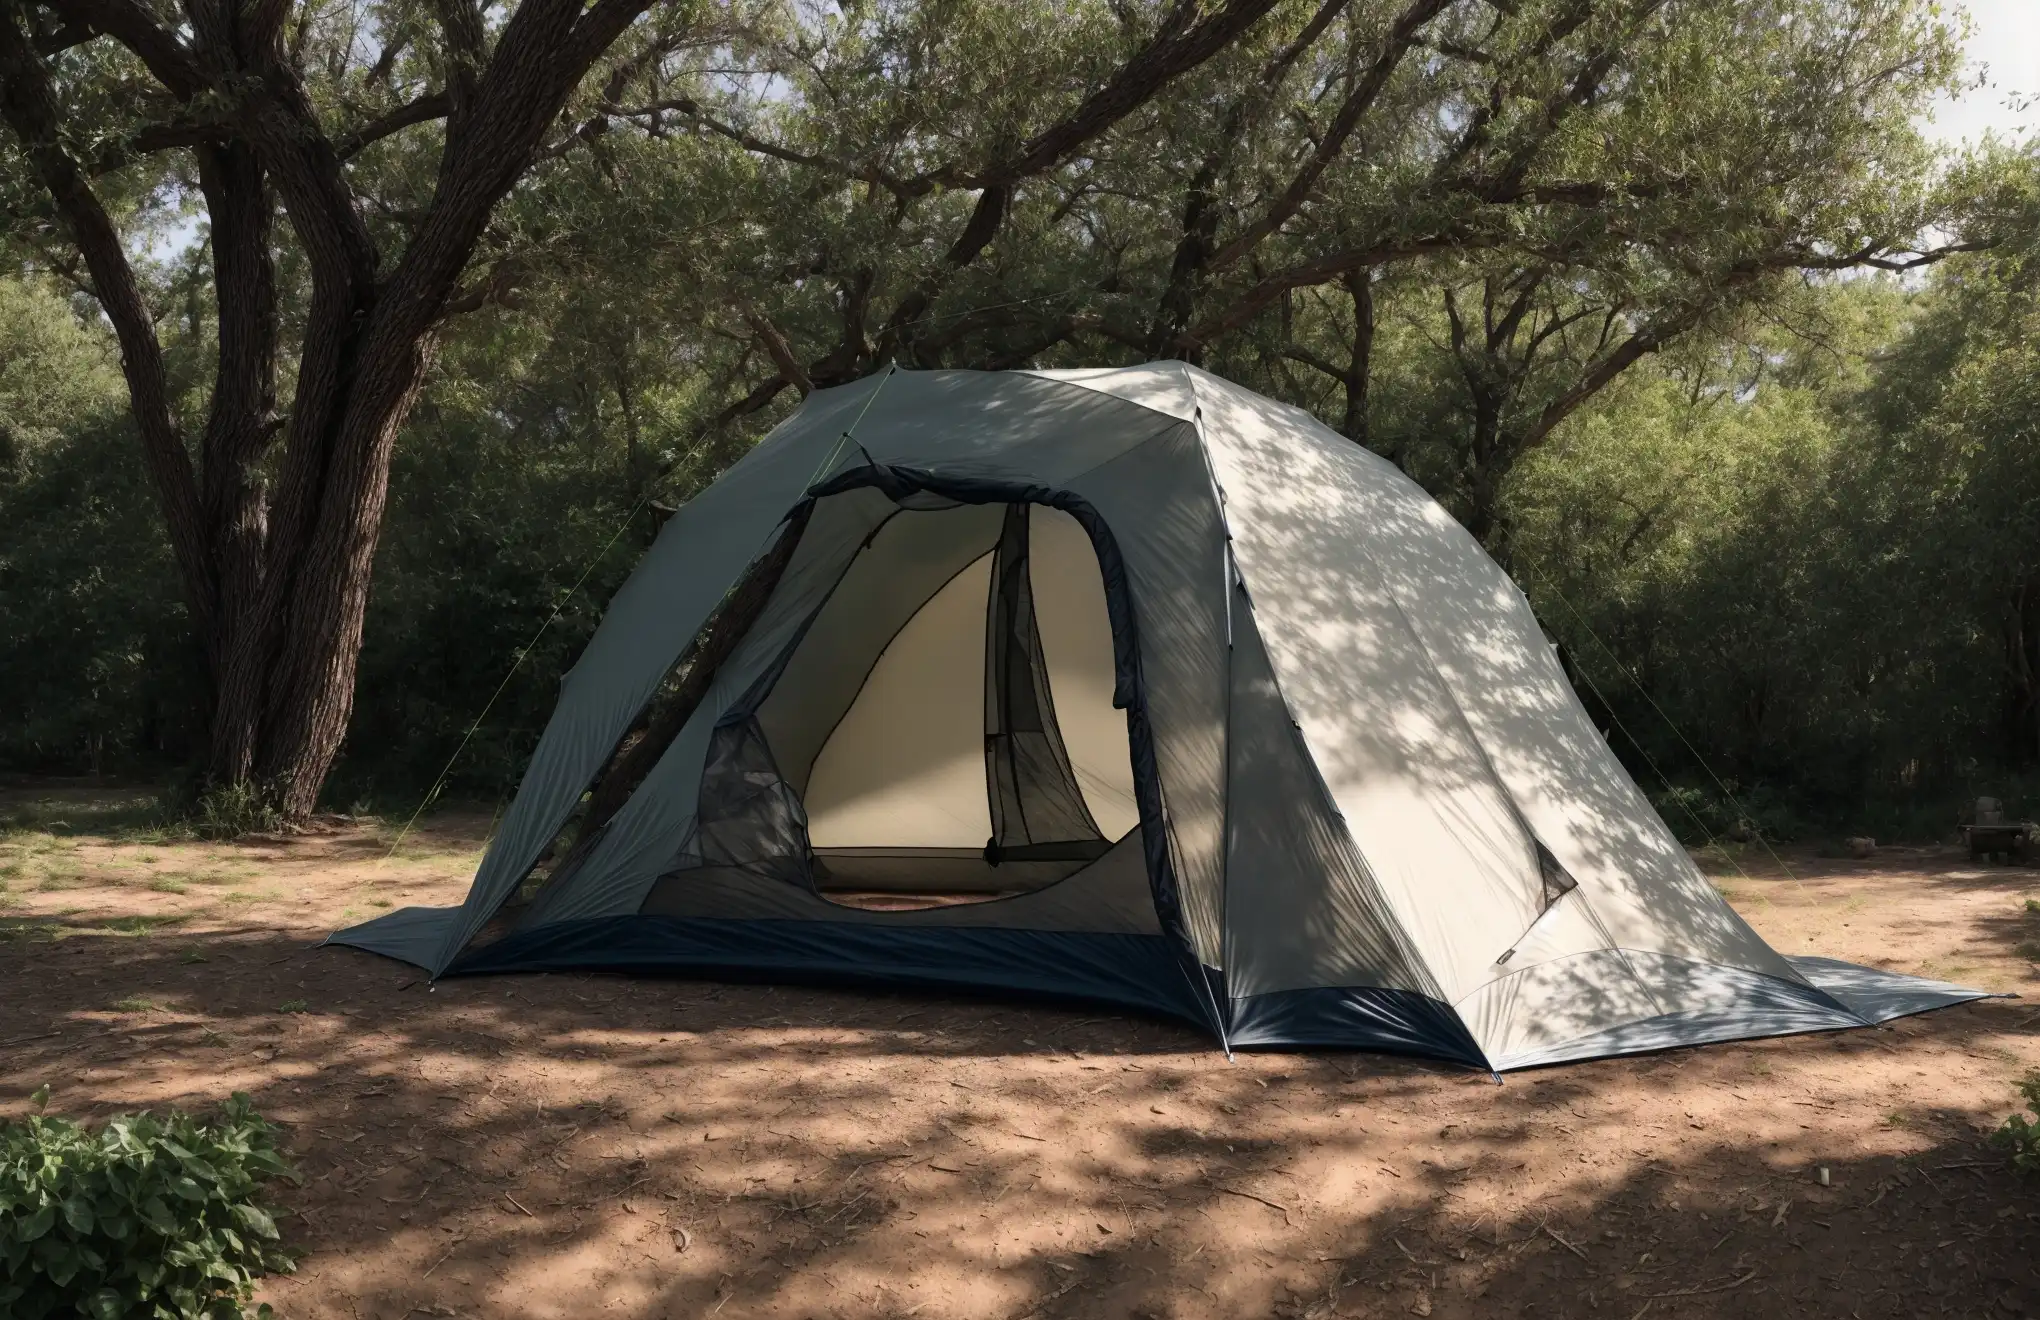 How to Cool a Tent Without Electricity: Beat the Heat